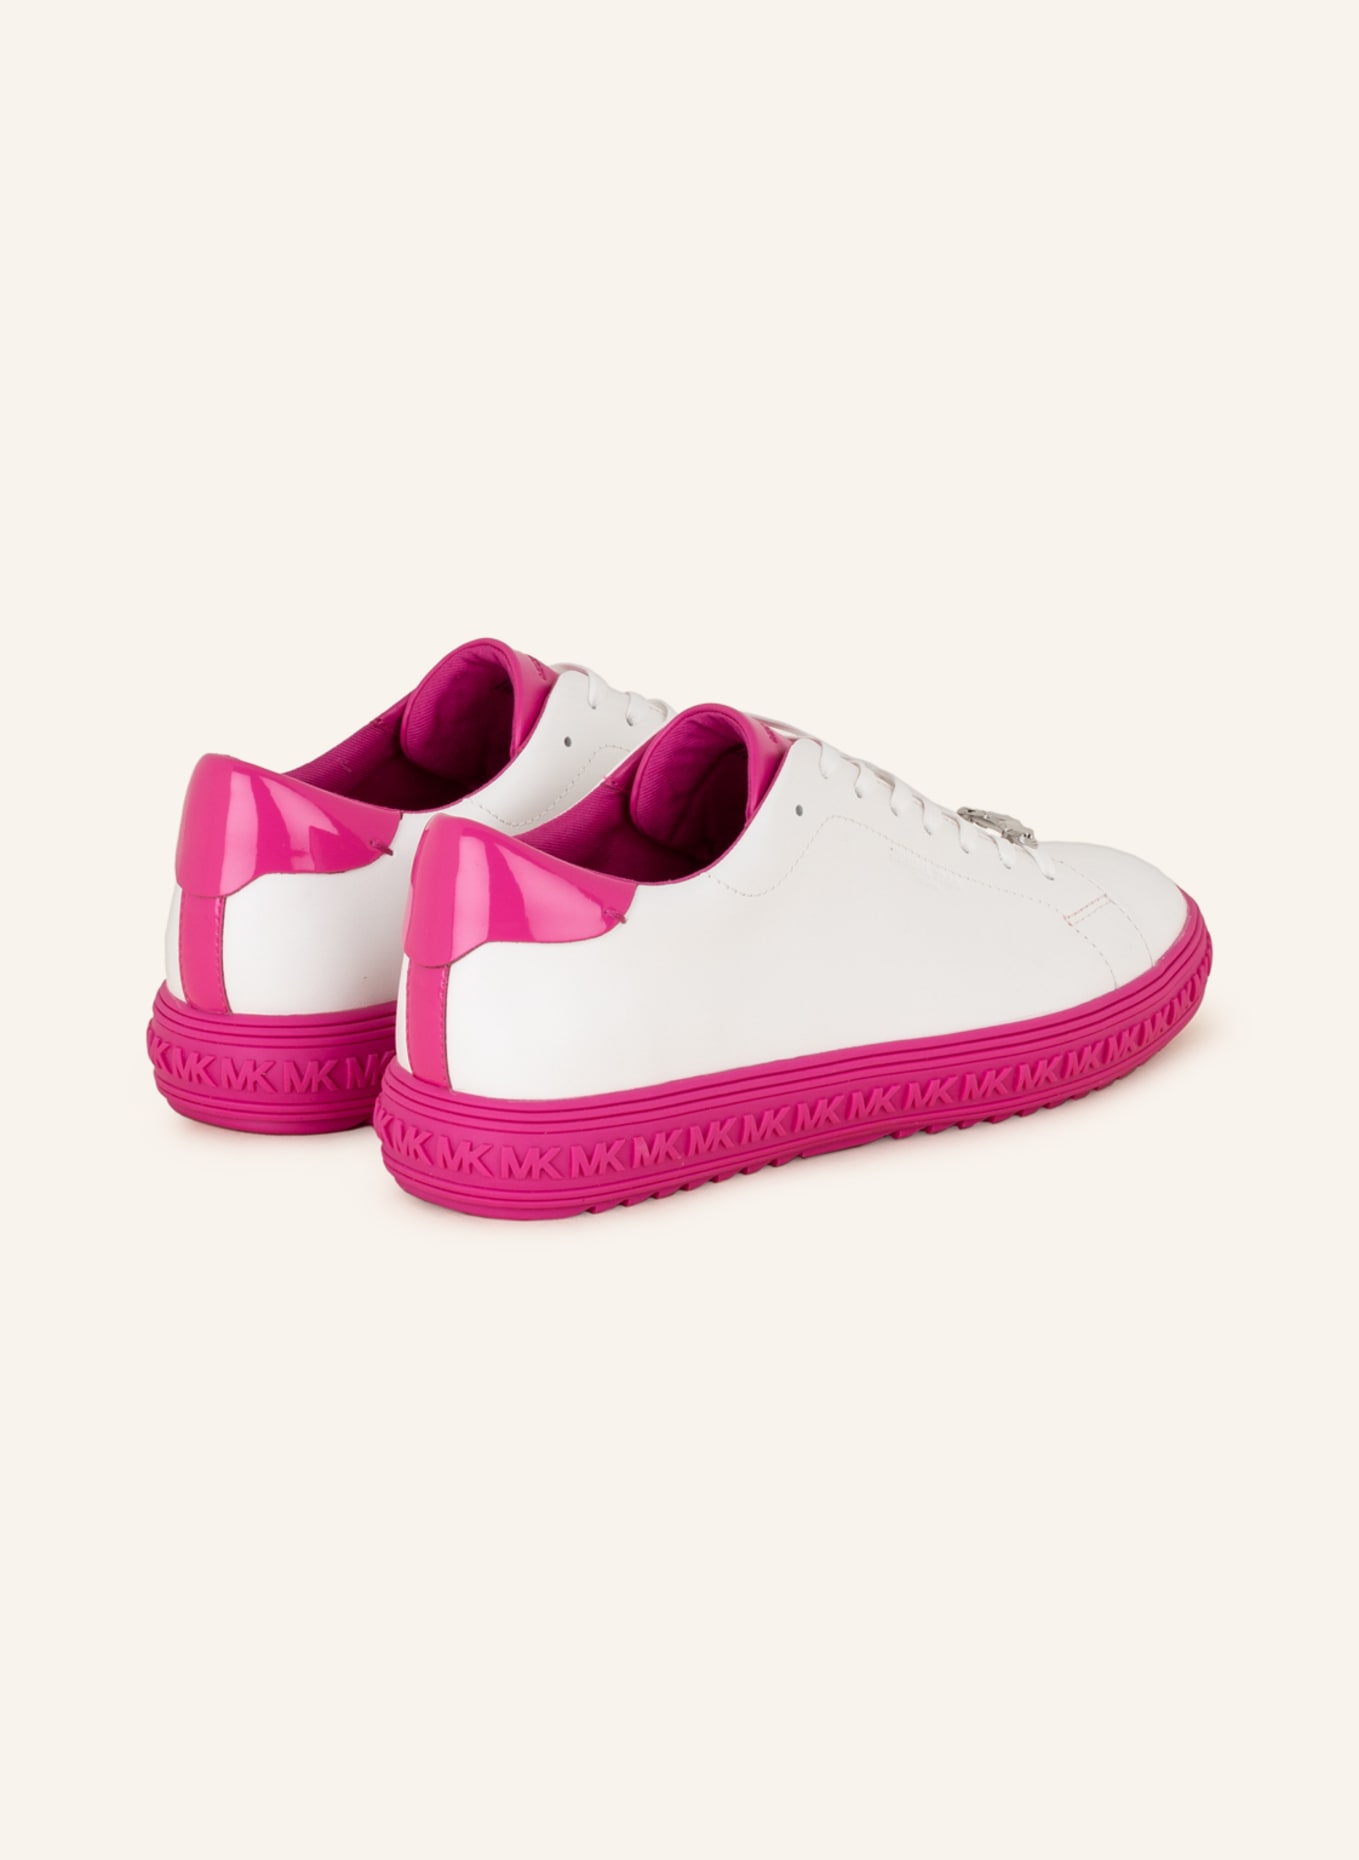 Trainers MICHAEL MICHAEL KORS  Mickey Trainer 43T1MKFS4D Shell Pink   Sneakers  Low shoes  Womens shoes  efootweareu